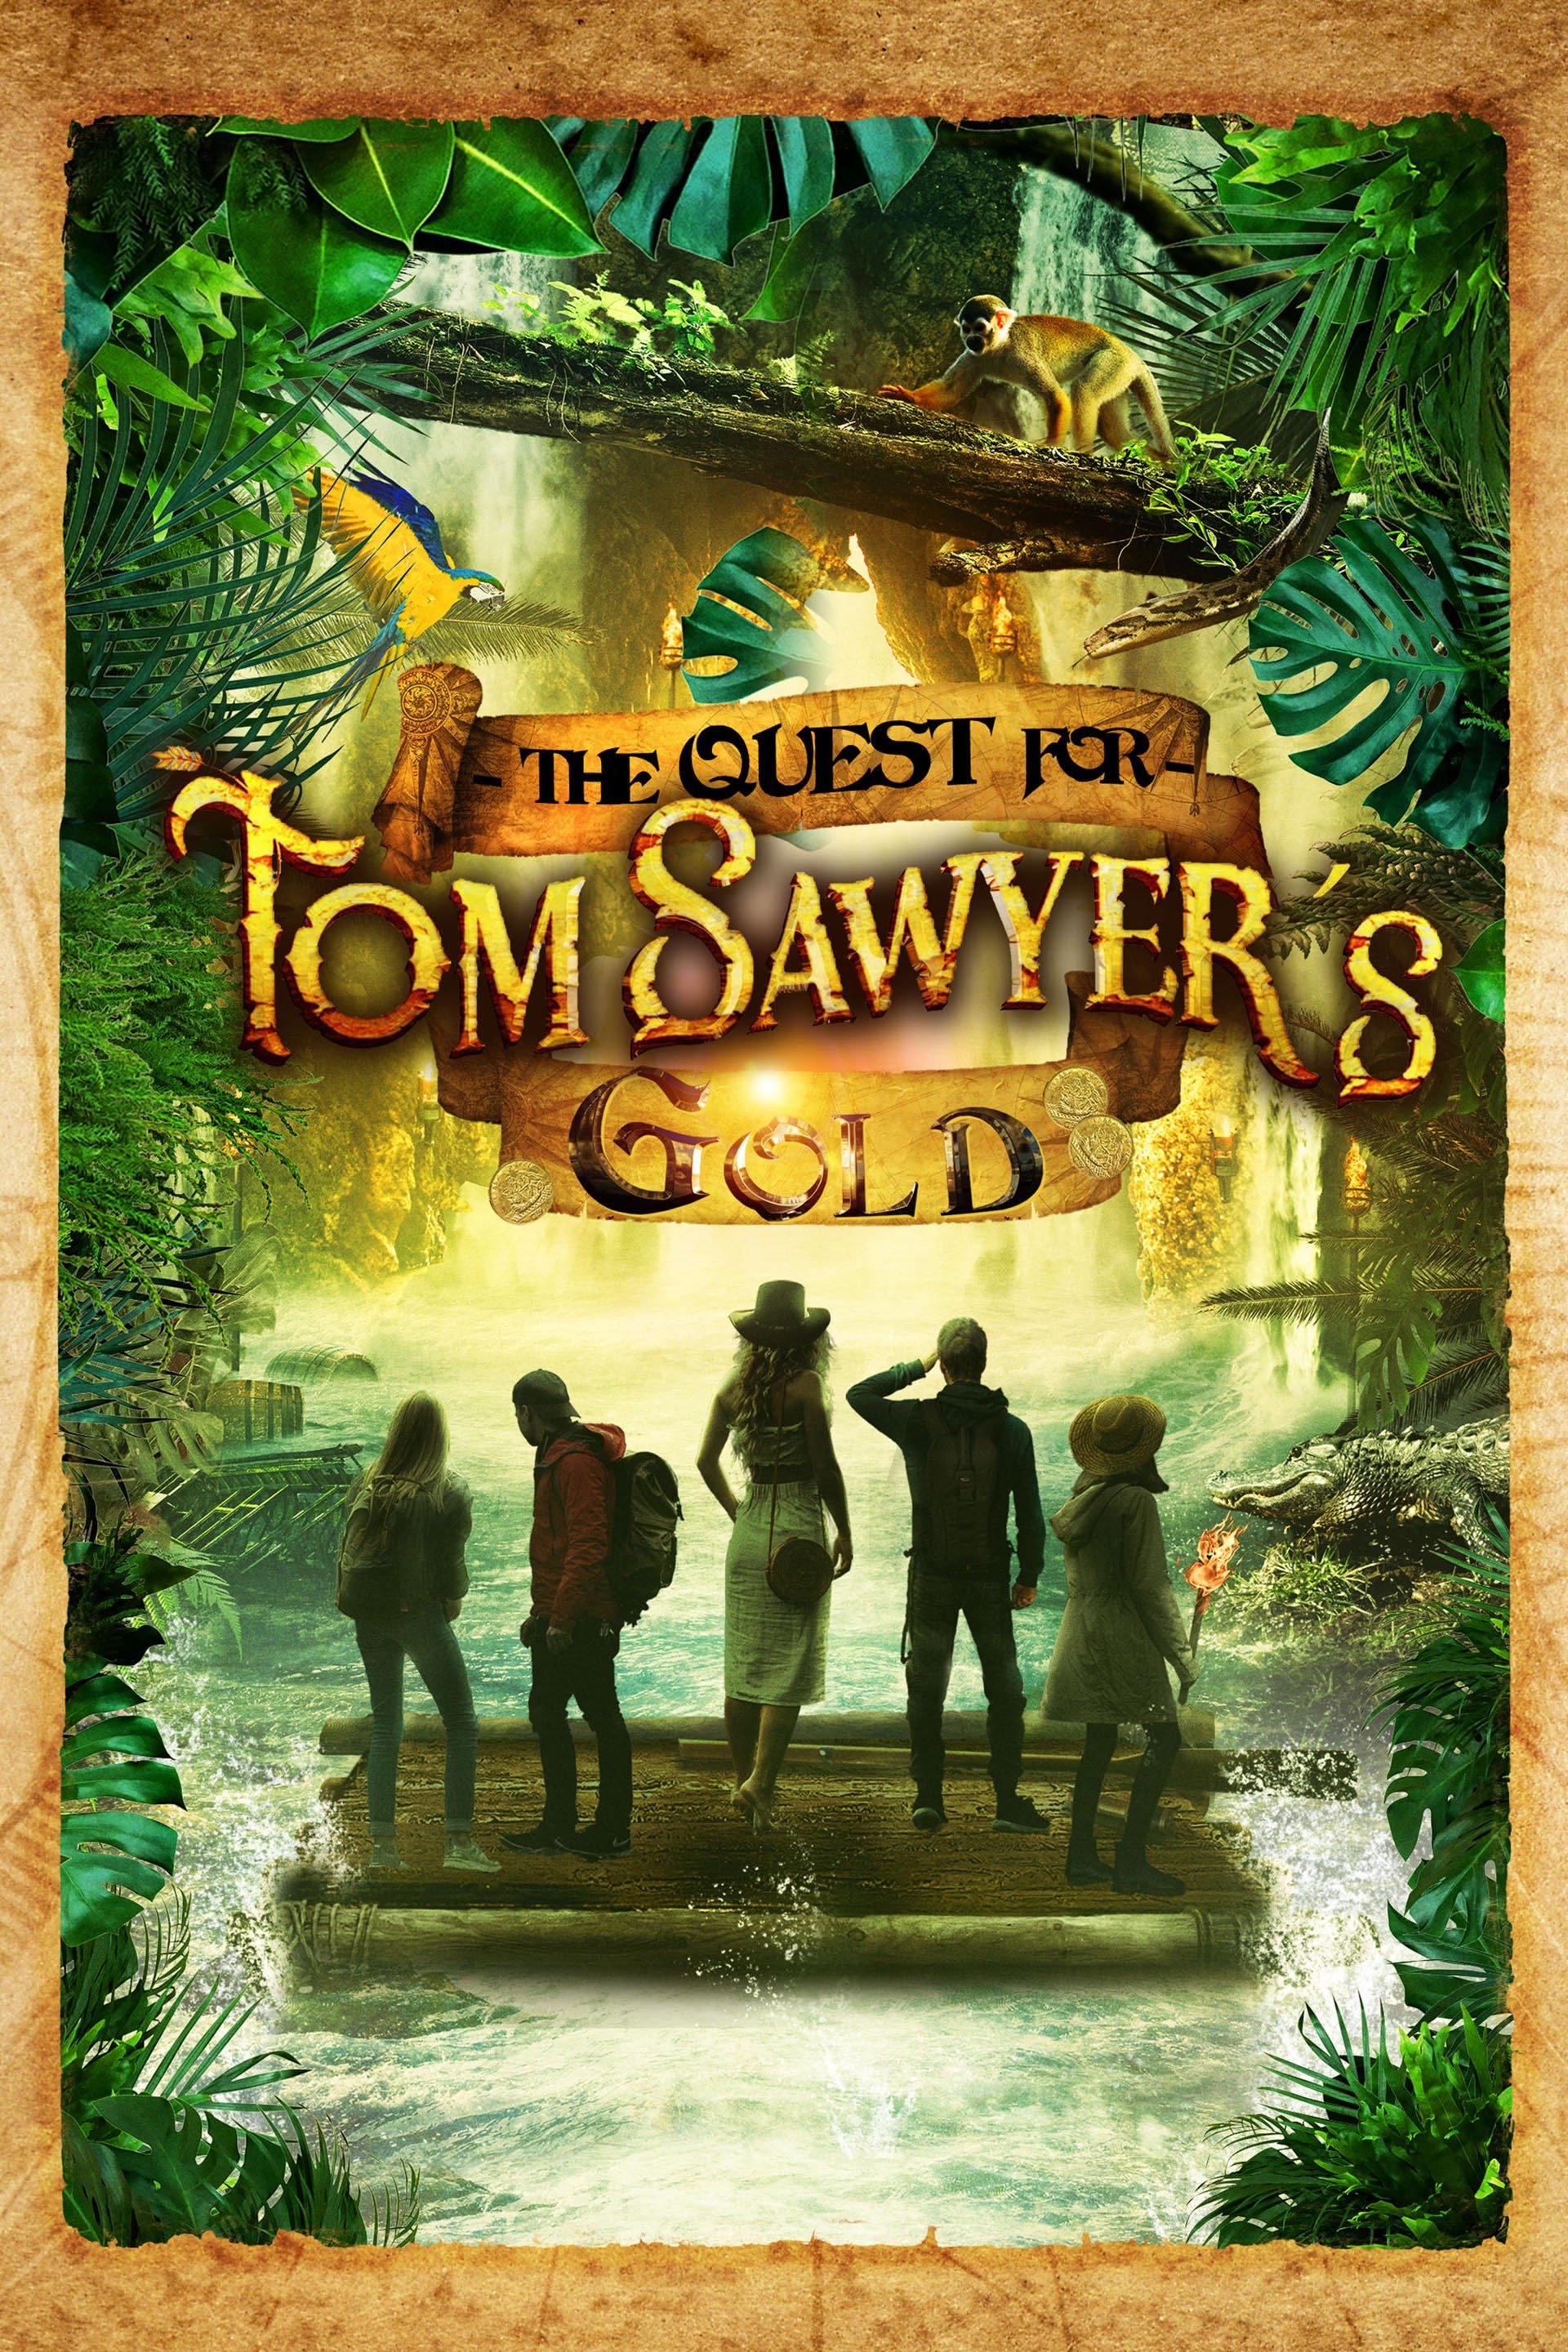 the quest for tom sawyer's gold movie review